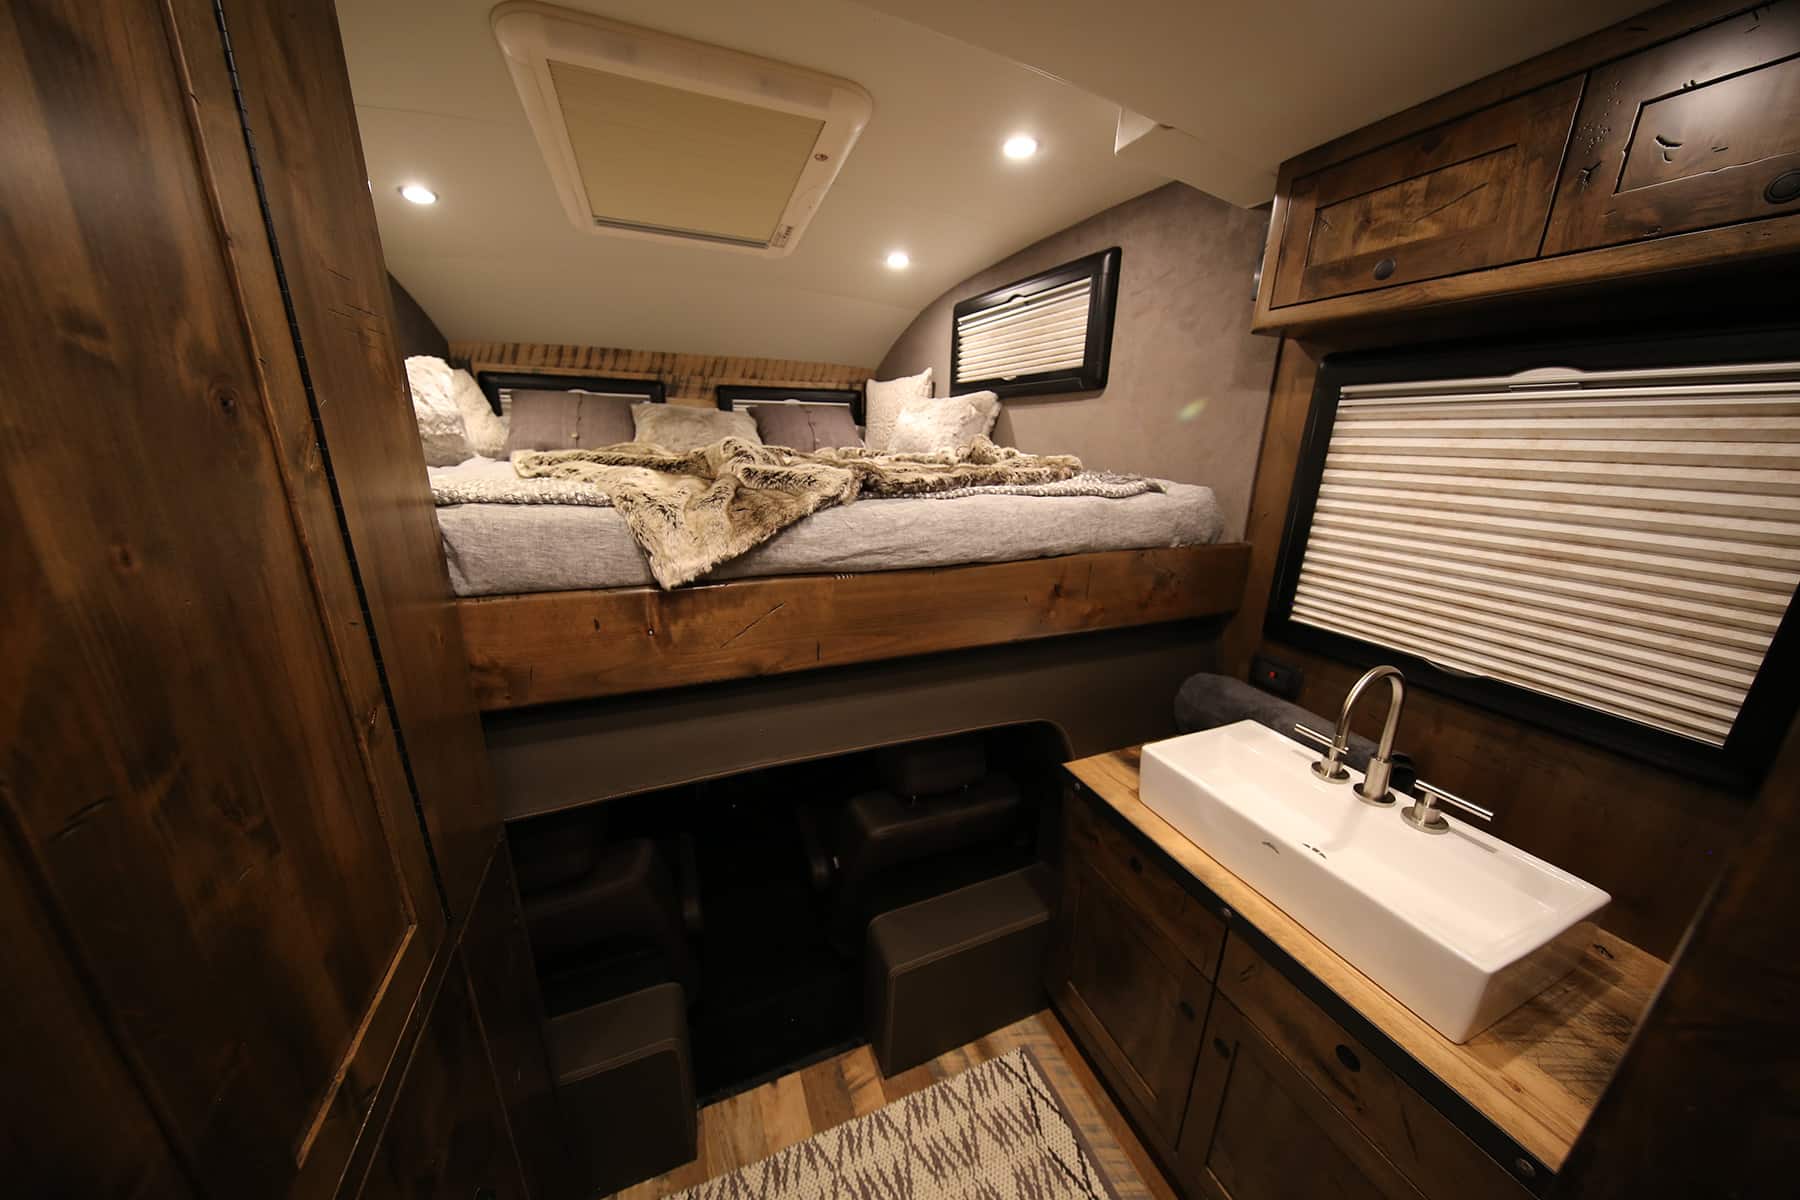 EarthRoamer XVHD This Ultimate Expedition Camper is a